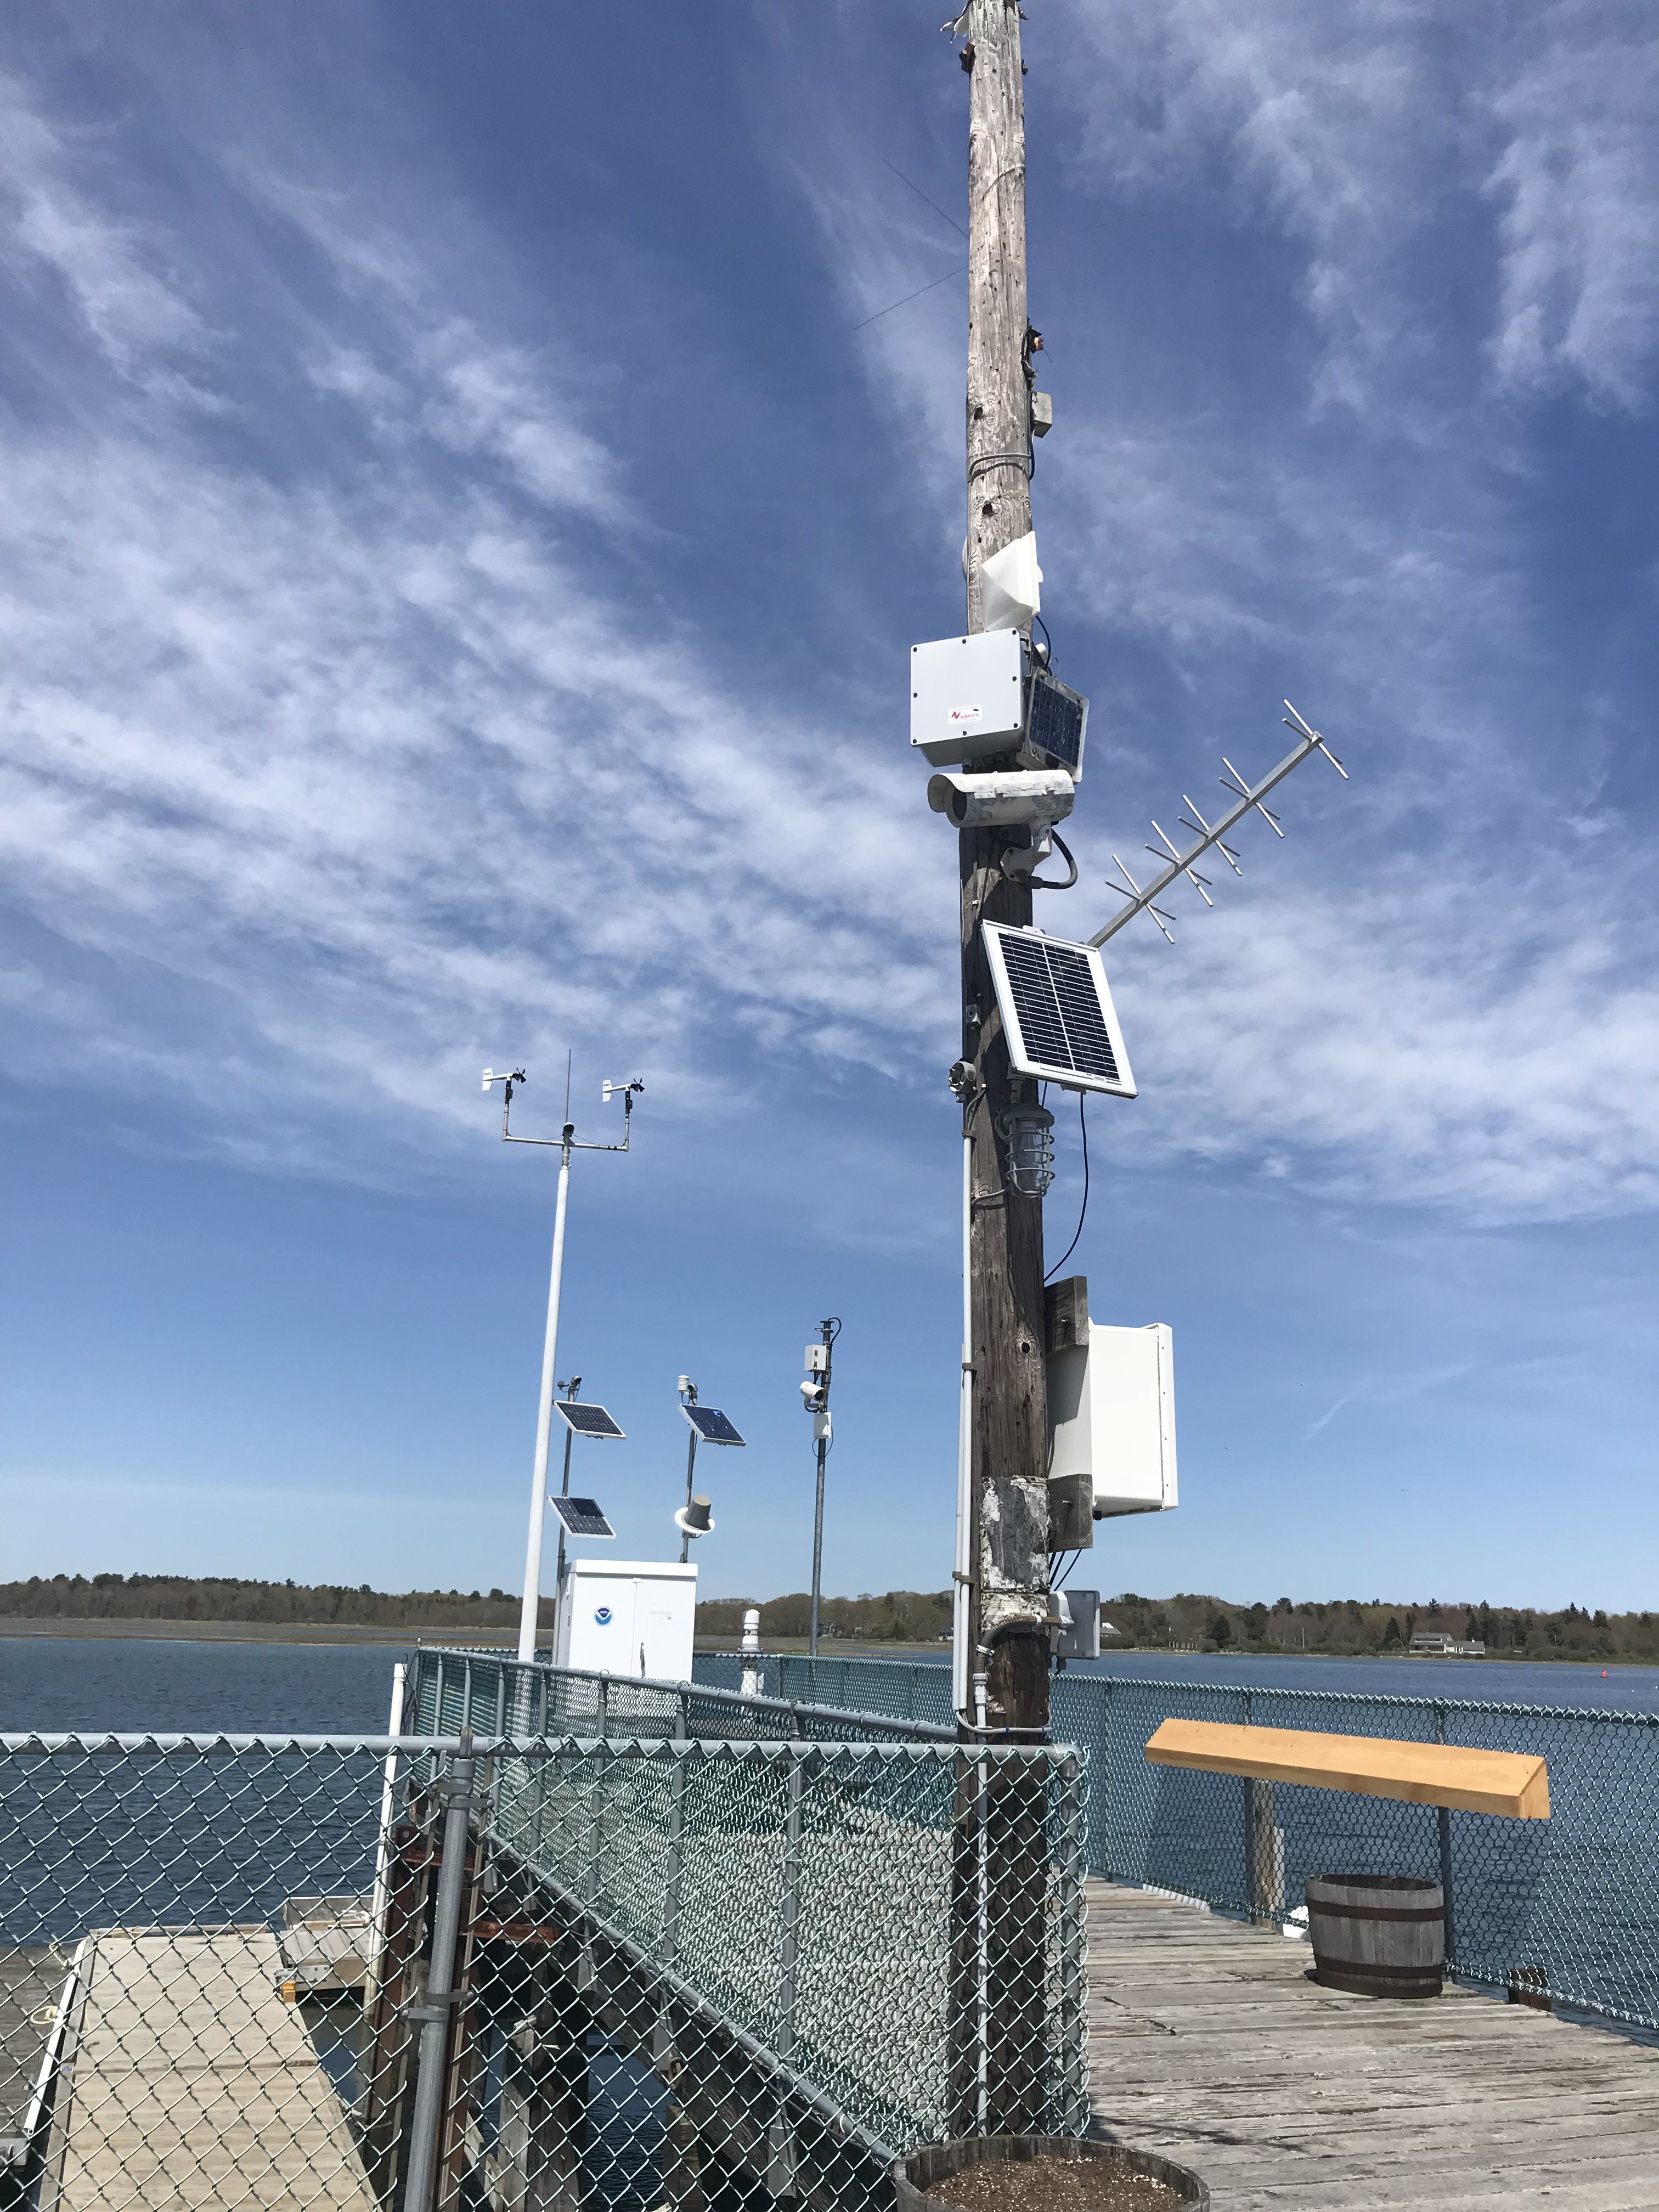 SWMP and other monitoring equipment at the Wells Harbor dock.